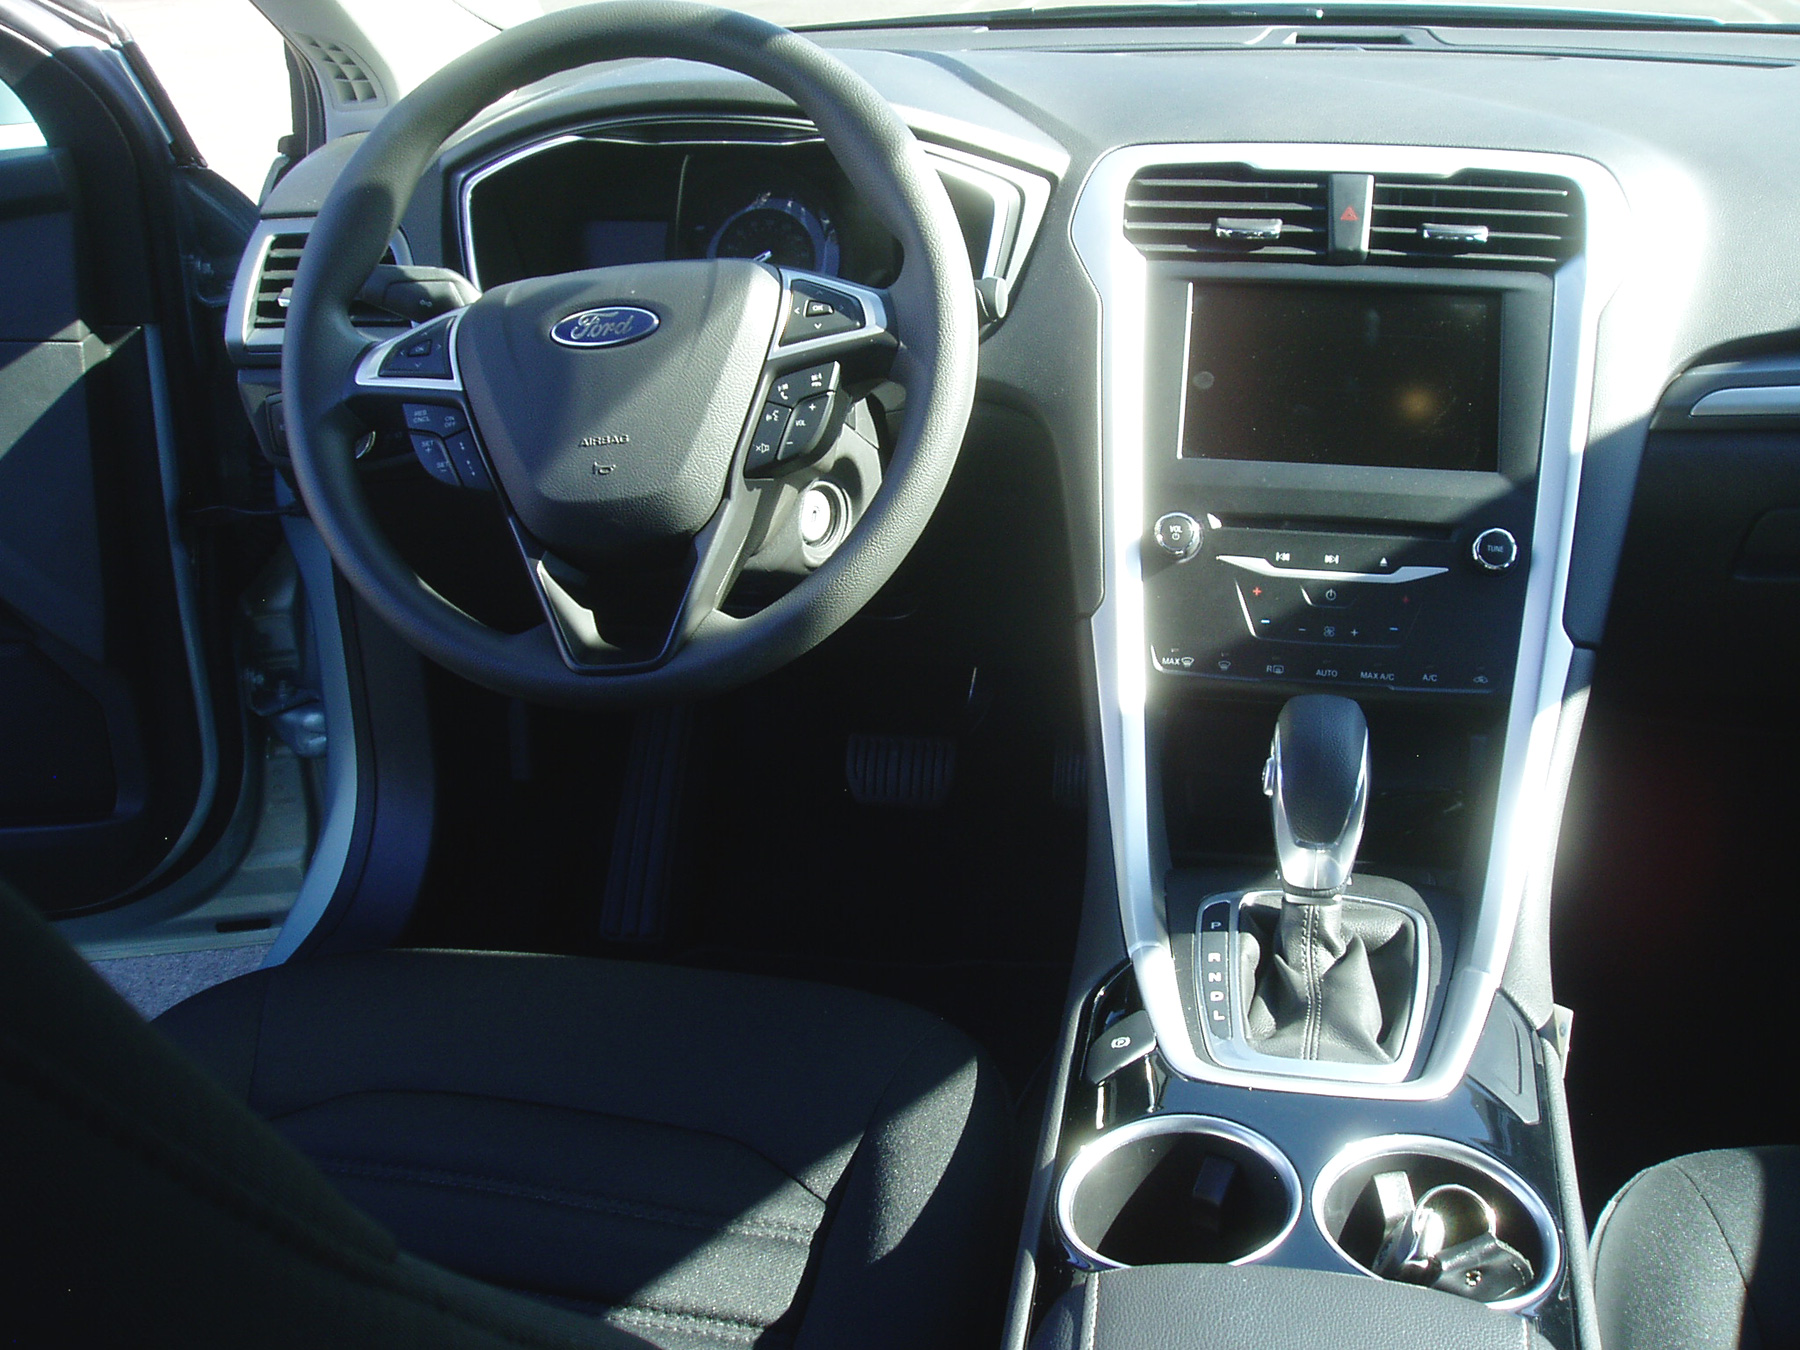 Test Drive: 2013 Ford Fusion Hybrid | Our Auto Expert